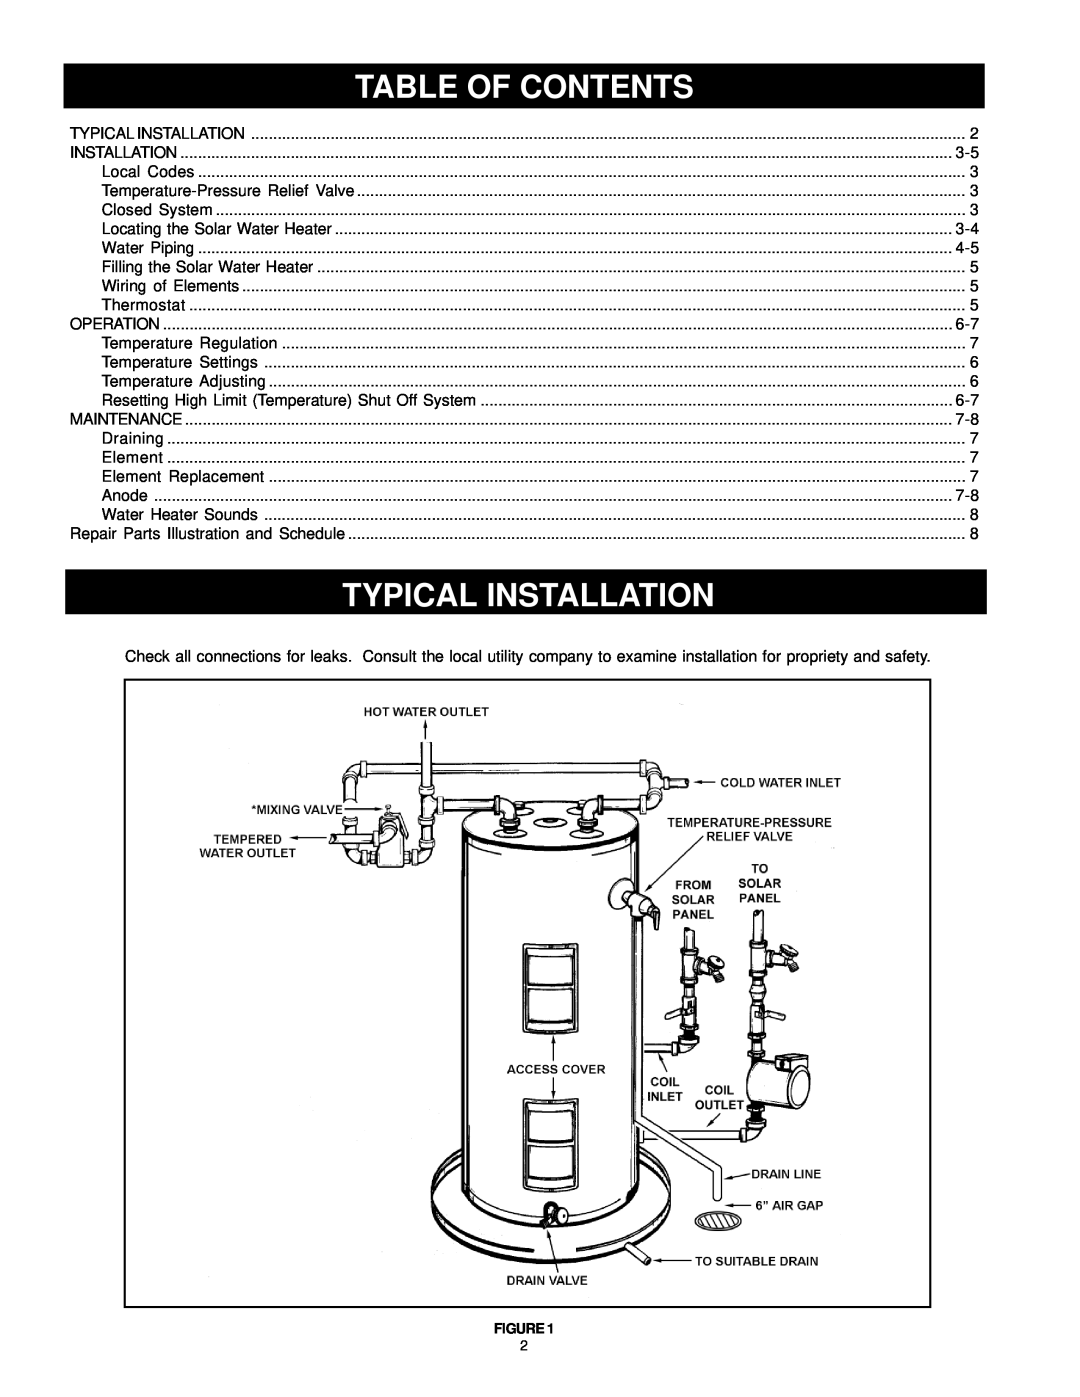 American Water Heater 317365-002 instruction manual Table Of Contents, Typical Installation 